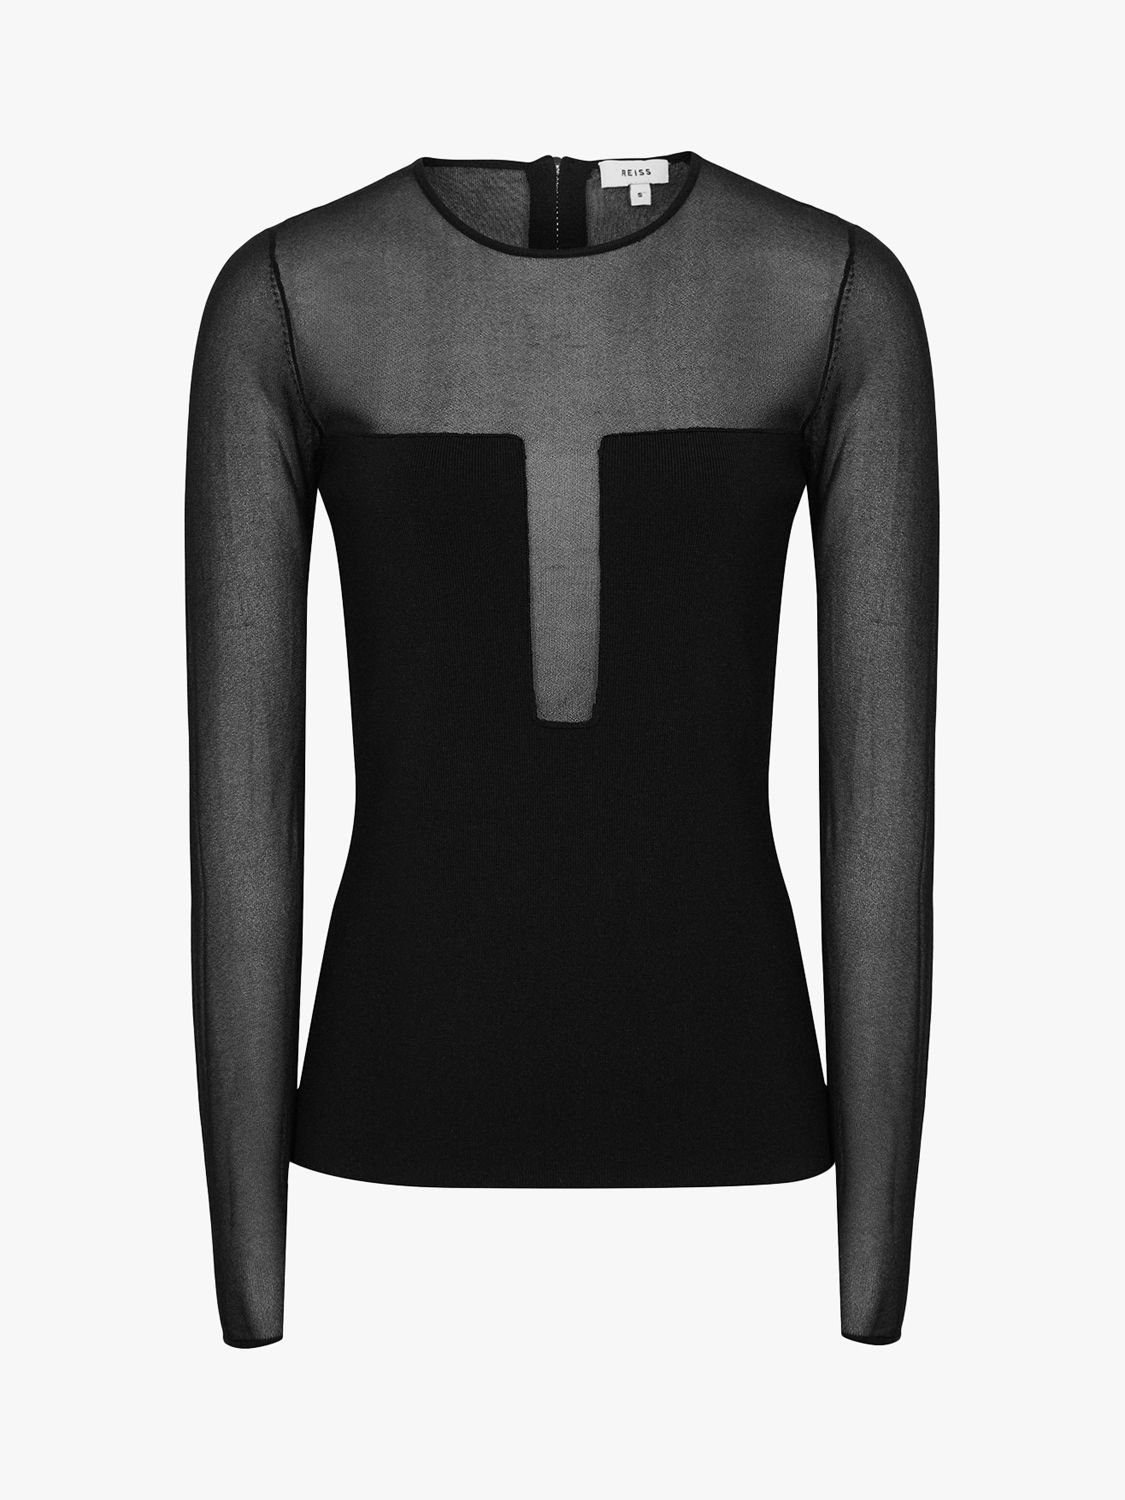 Reiss Lily Plunge Semi-Sheer Top, Black, XS